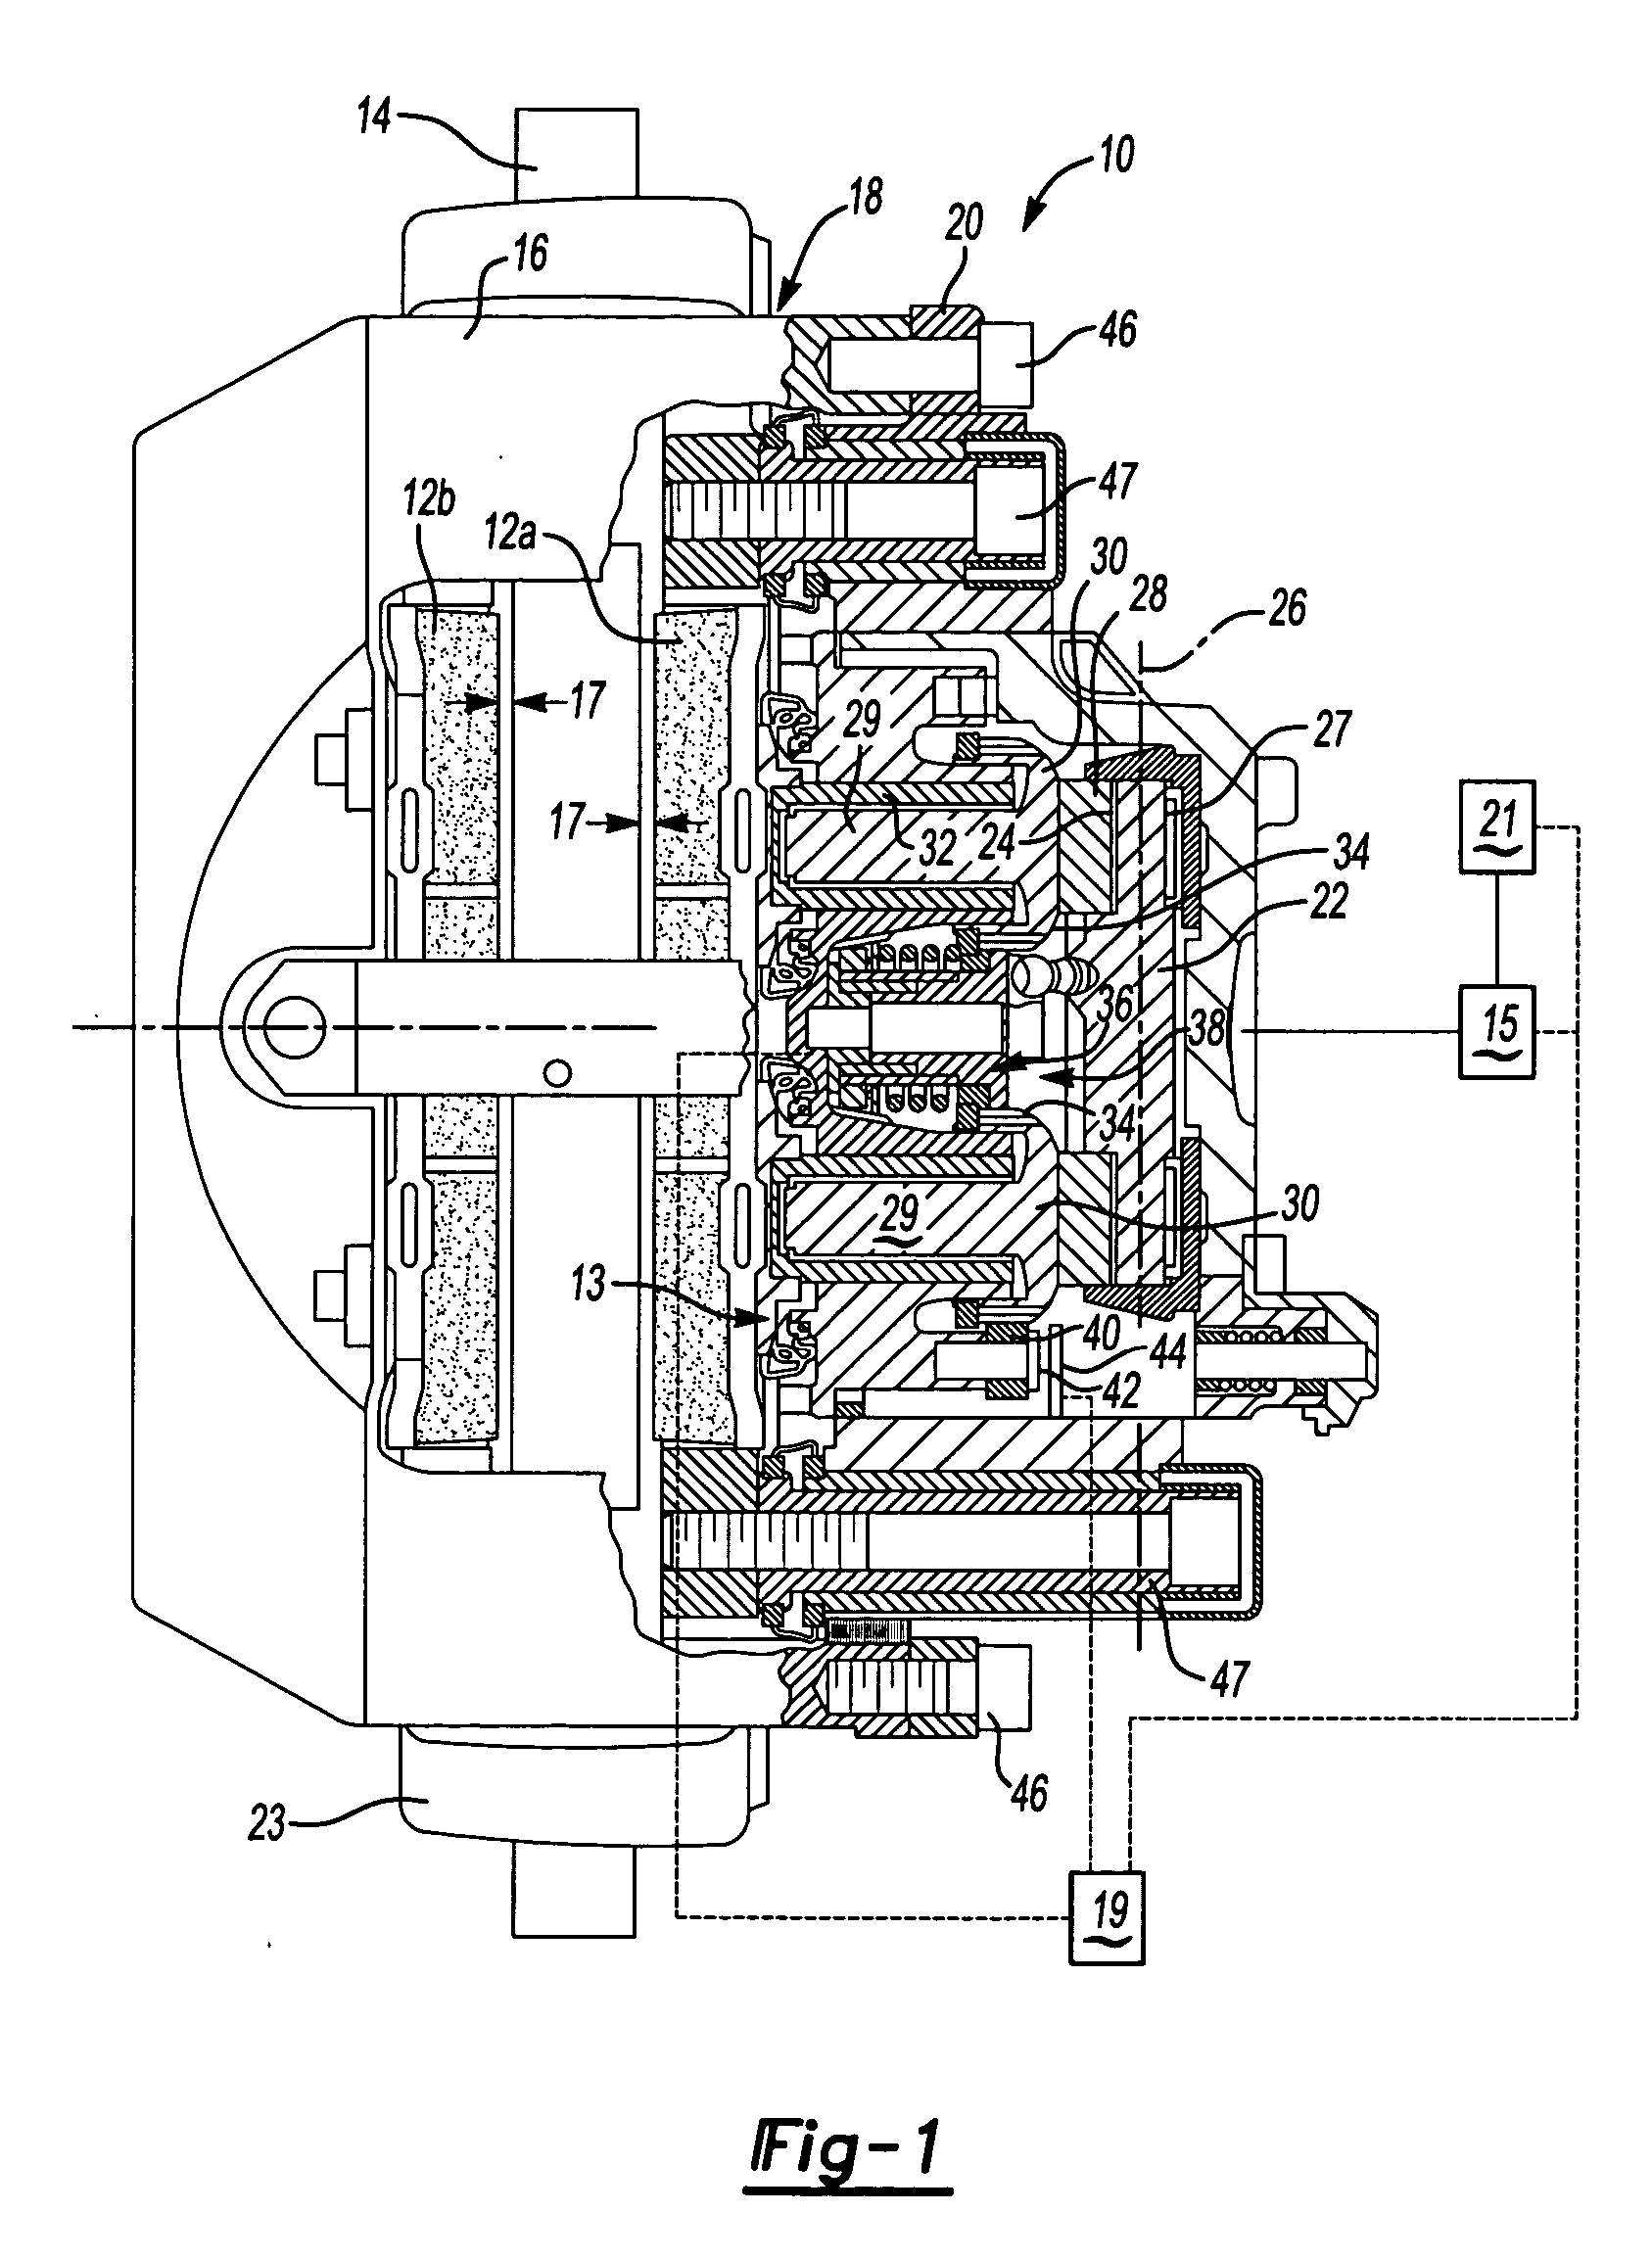 Brake assembly with brake pad position and wear sensor